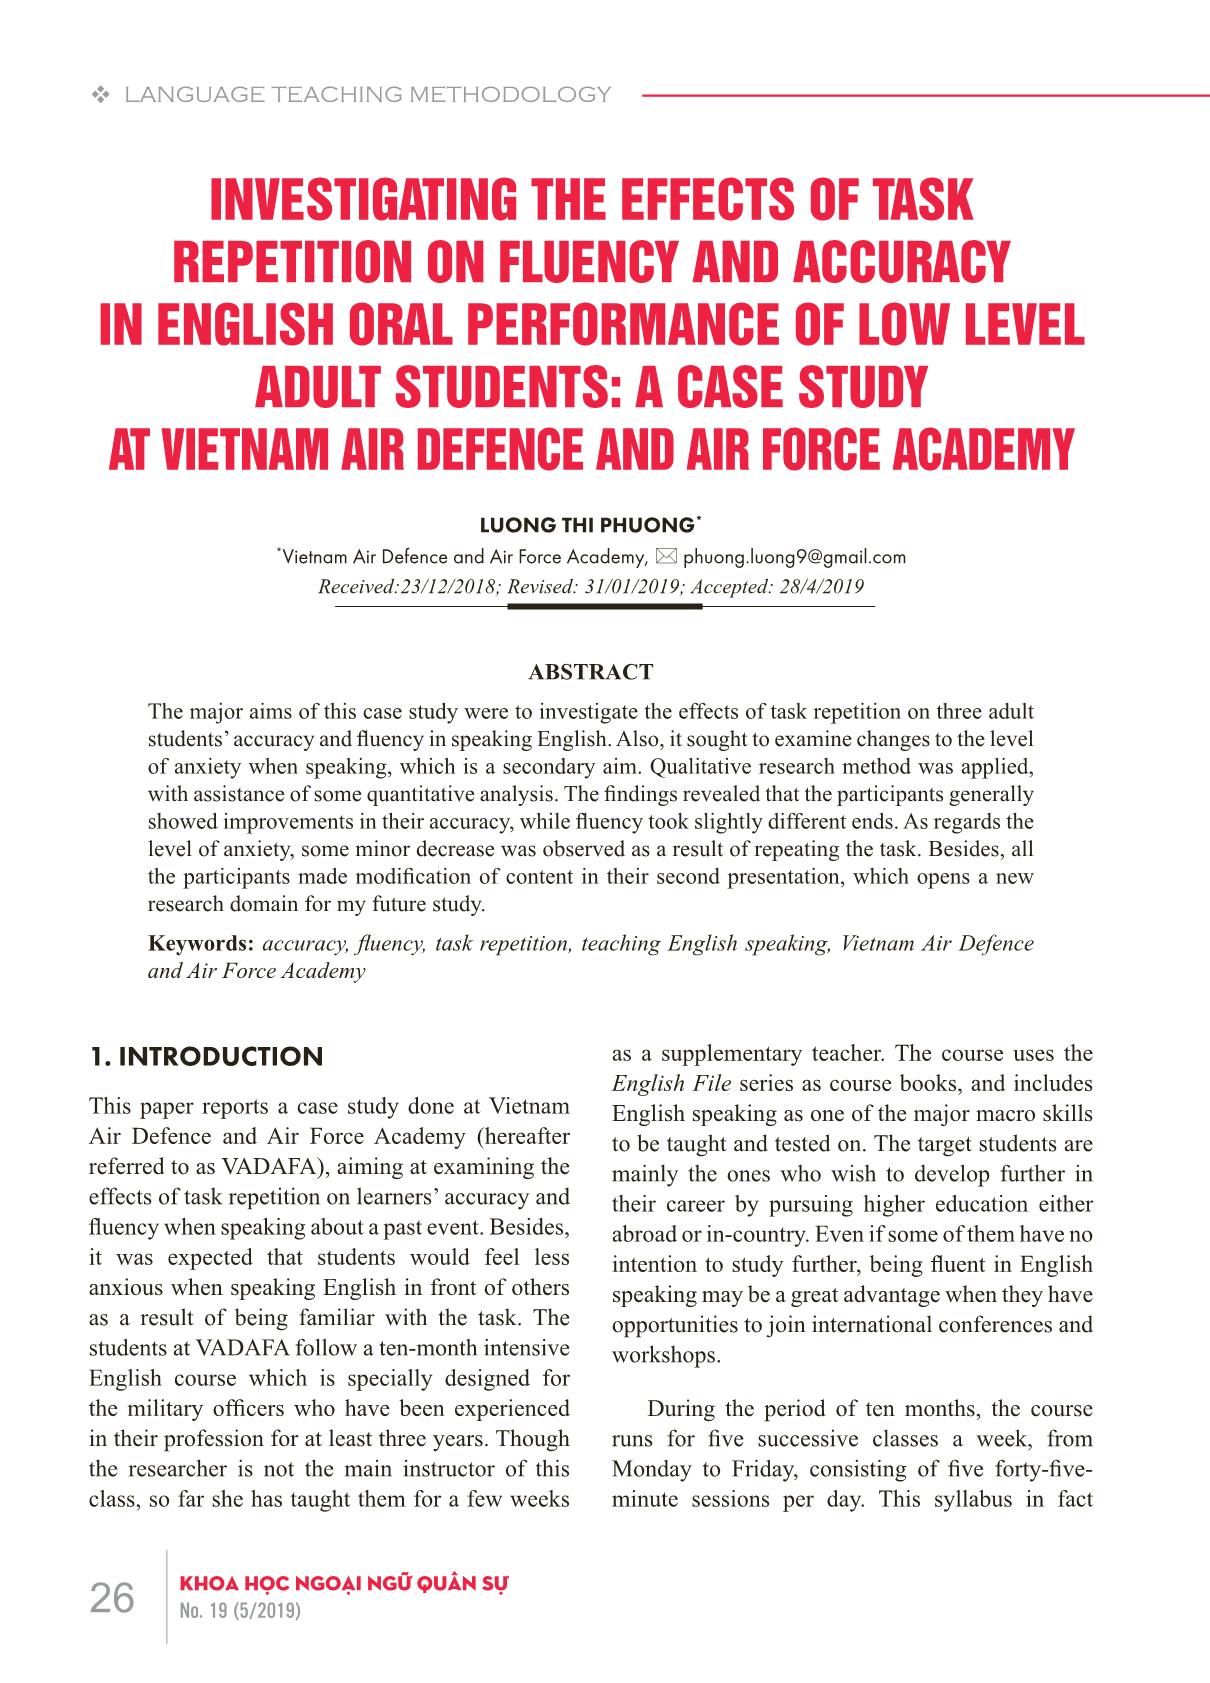 Investigating the effects of task repetition on fluency and accuracy in English oral performance of low level adult students: A case study at Vietnam air defence and air force academy trang 1